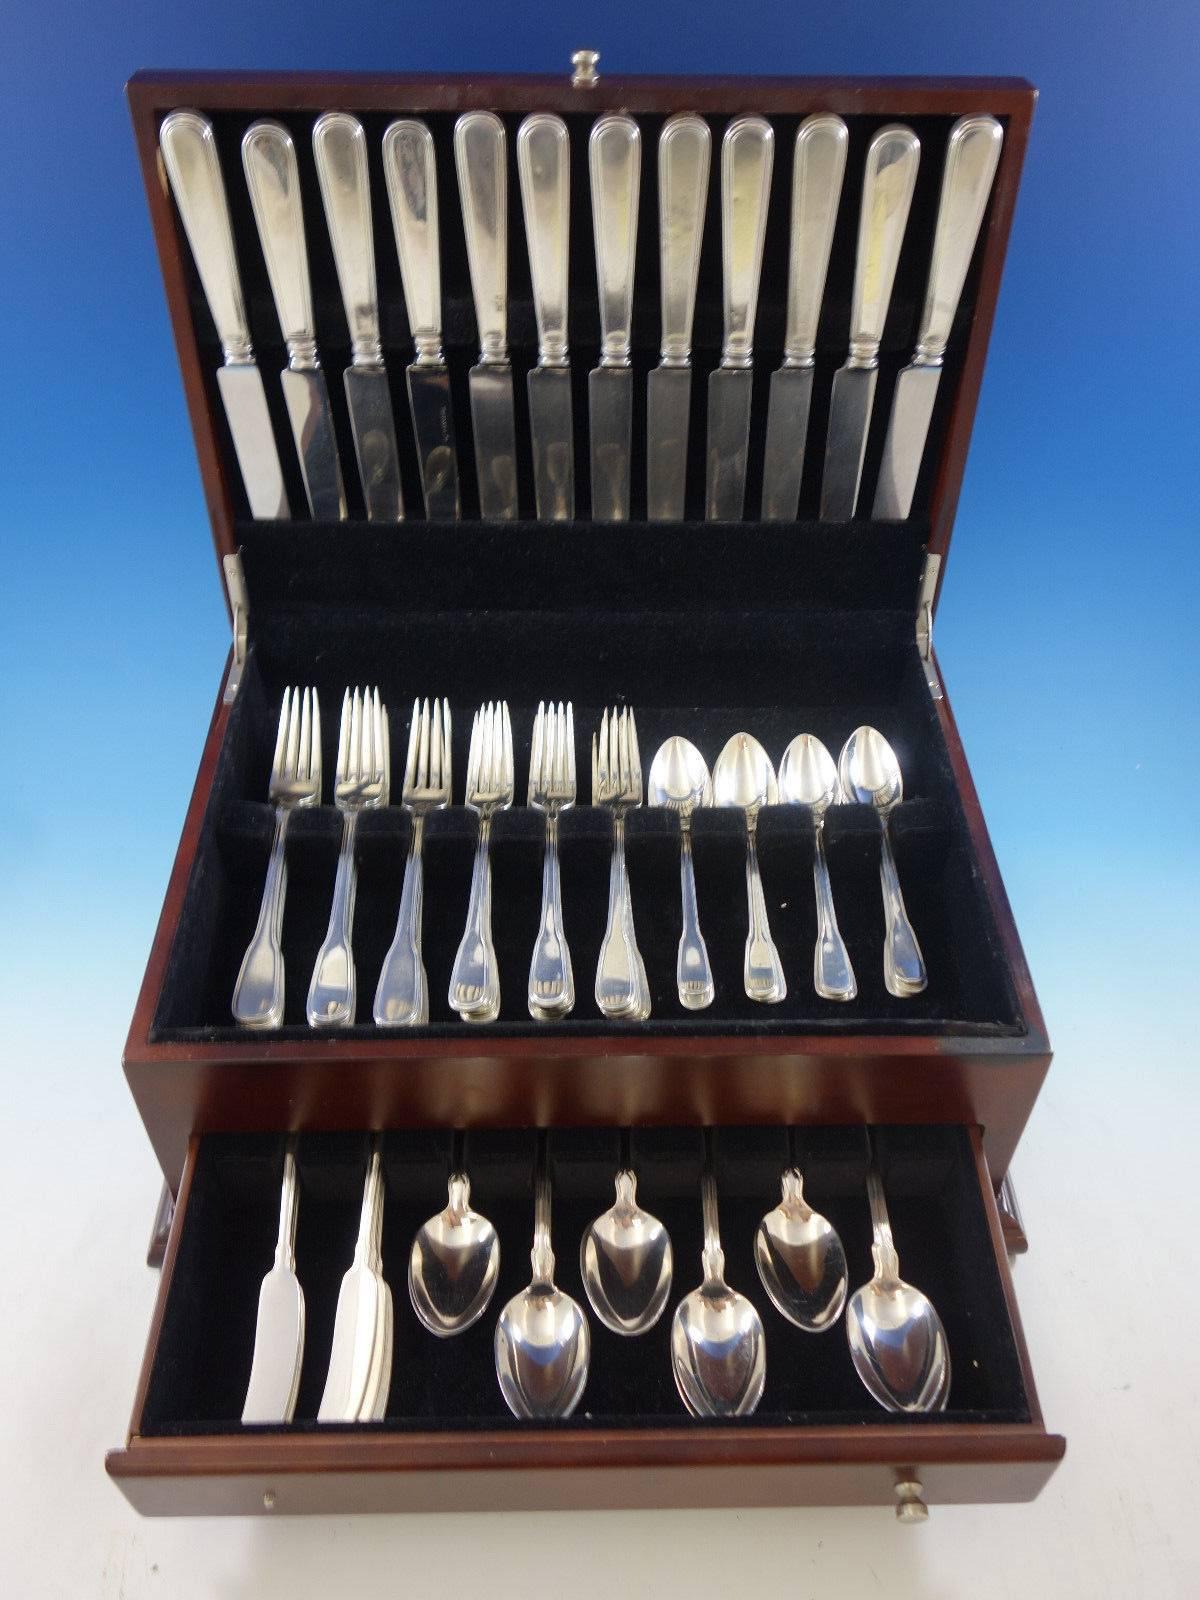 Hamilton by Tiffany & Co. sterling silver flatware set of 72 pieces. This set includes: 

12 dinner size knives, 10 1/4